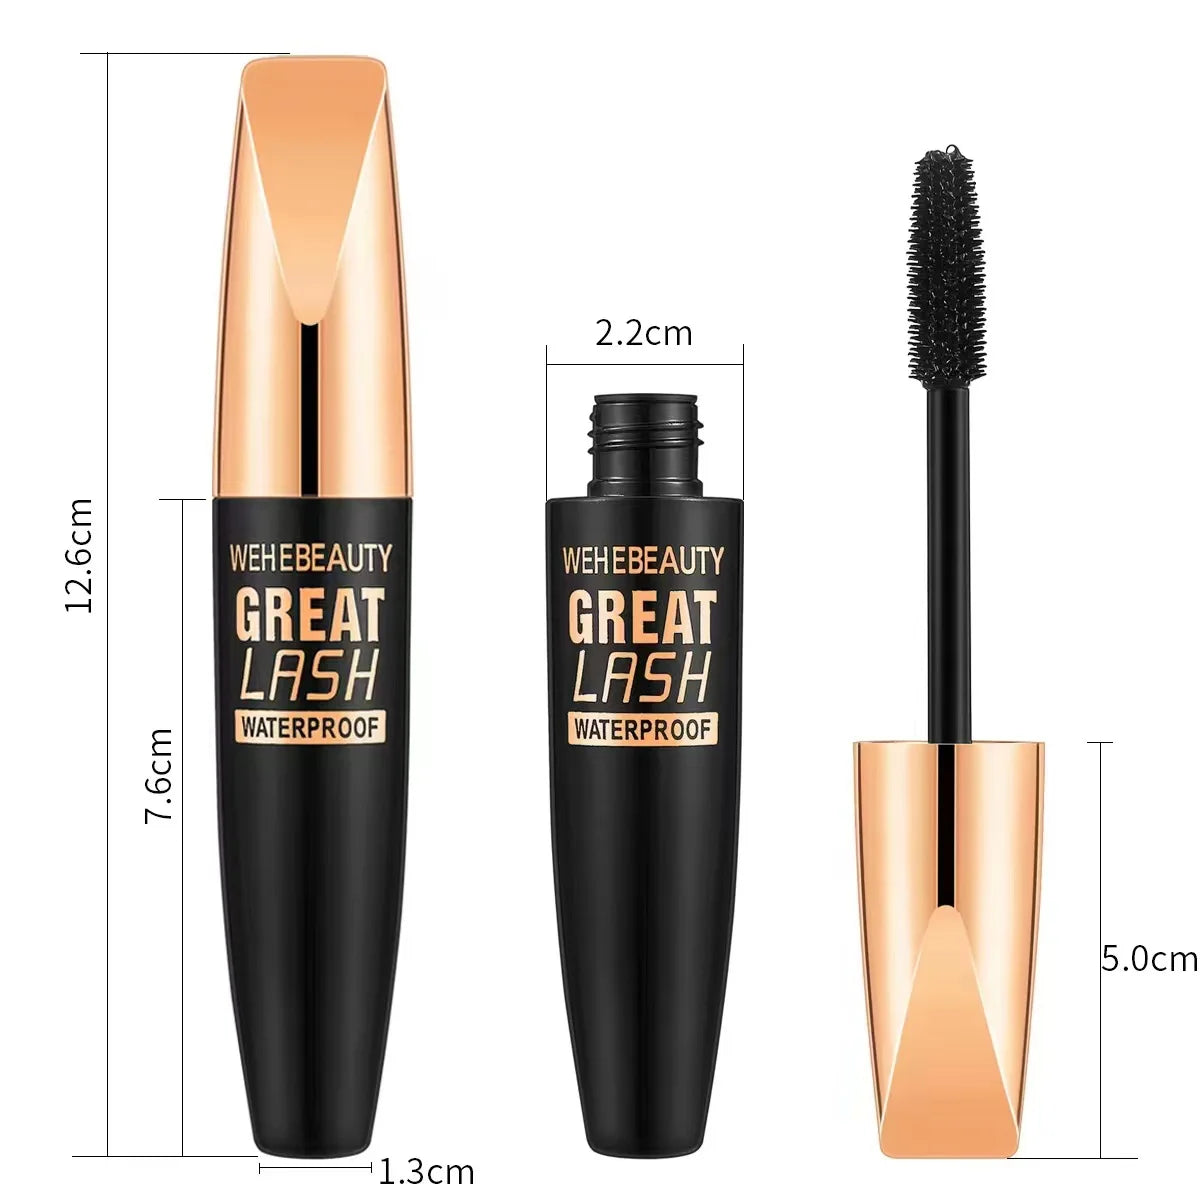 4D Eyelash Mascara Bottle Open Brush and Dimensions shown as width length and height of bottle